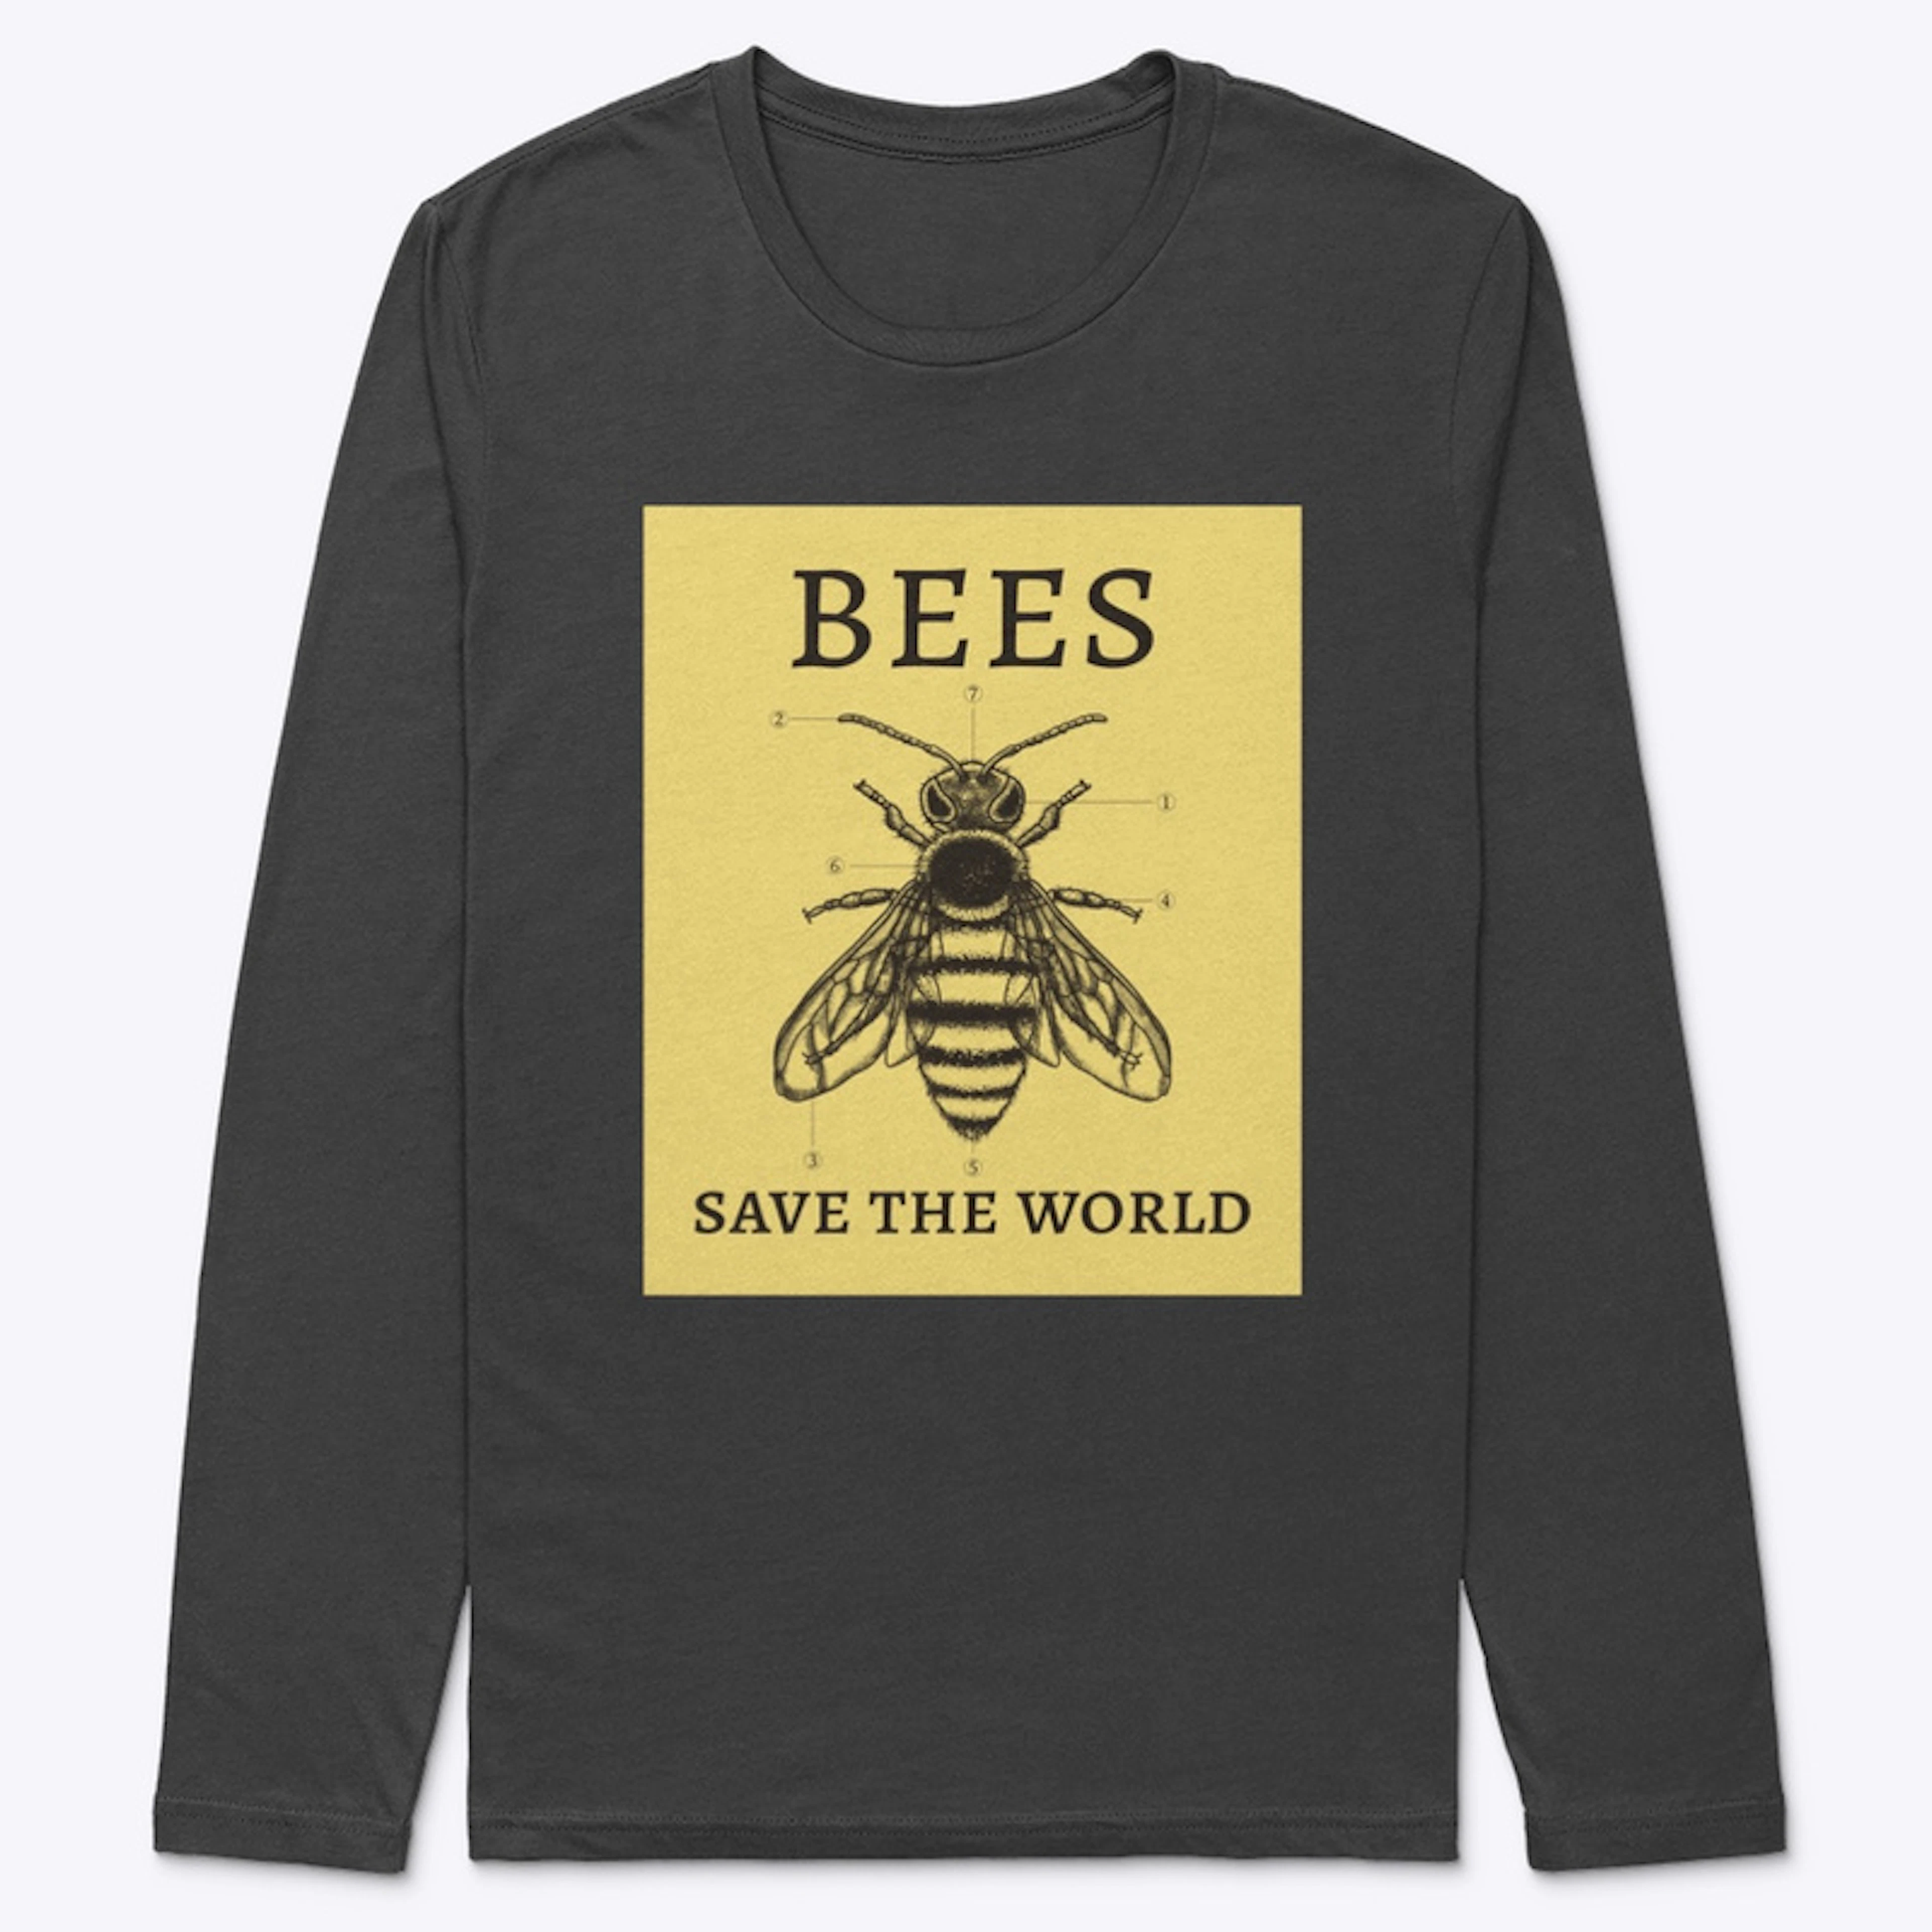 Bees Save the World Gear